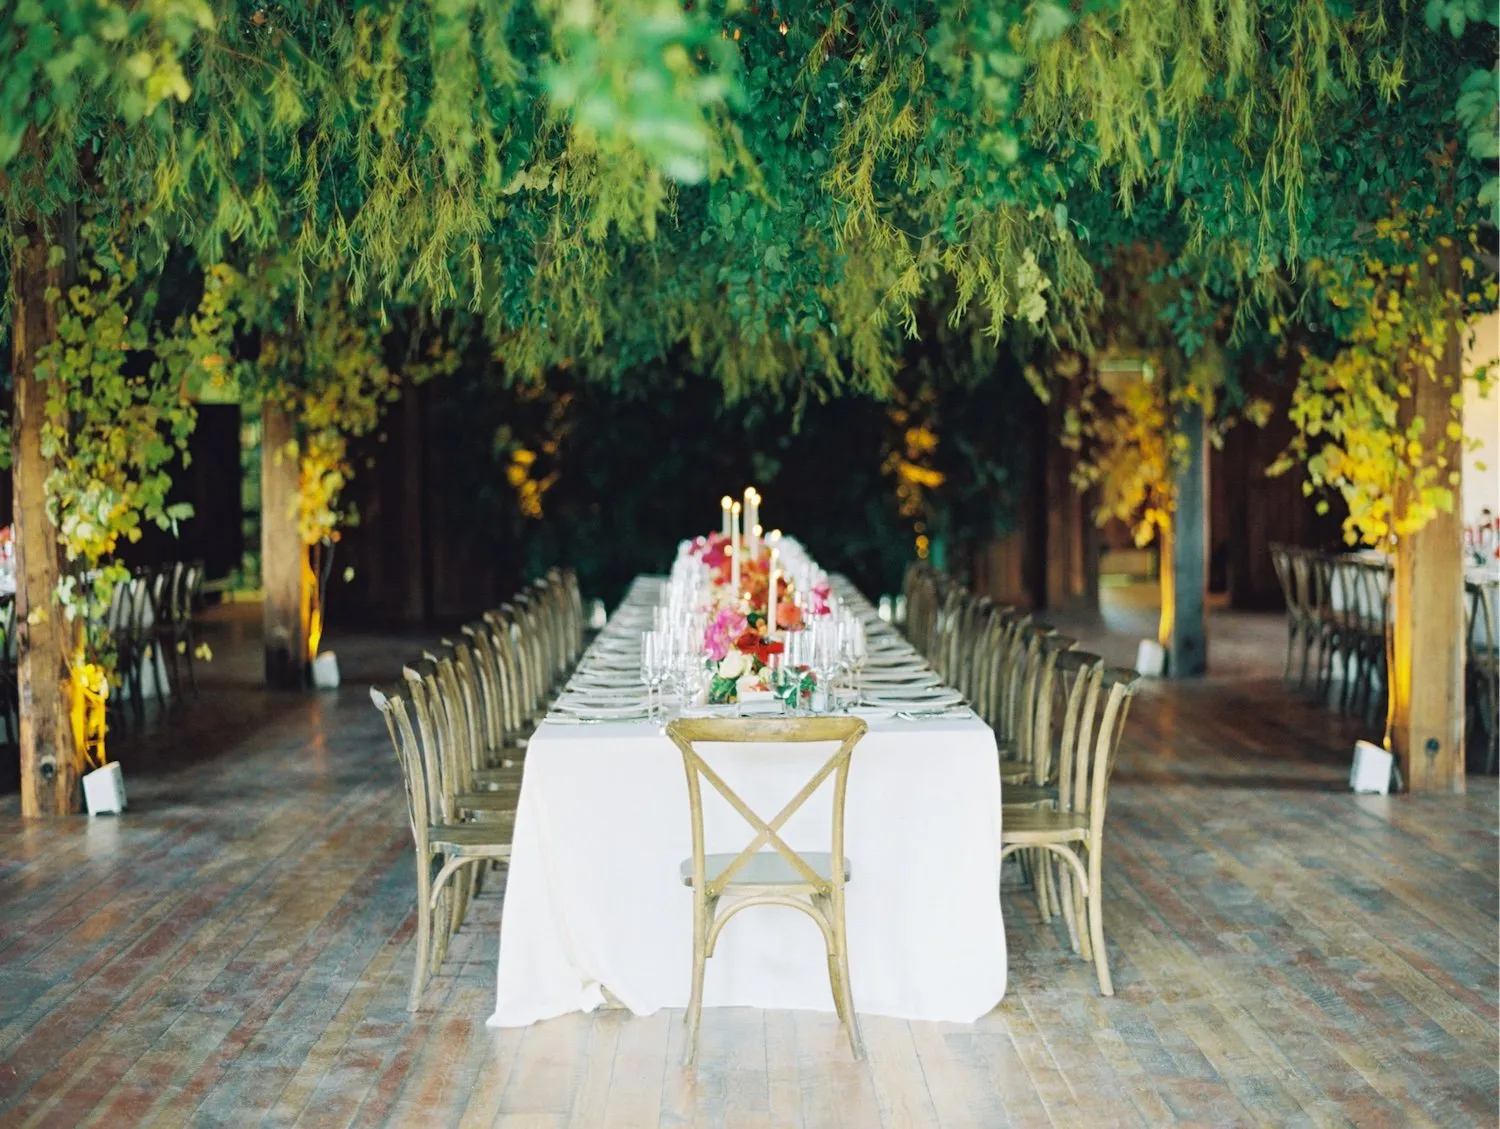 A long dining table